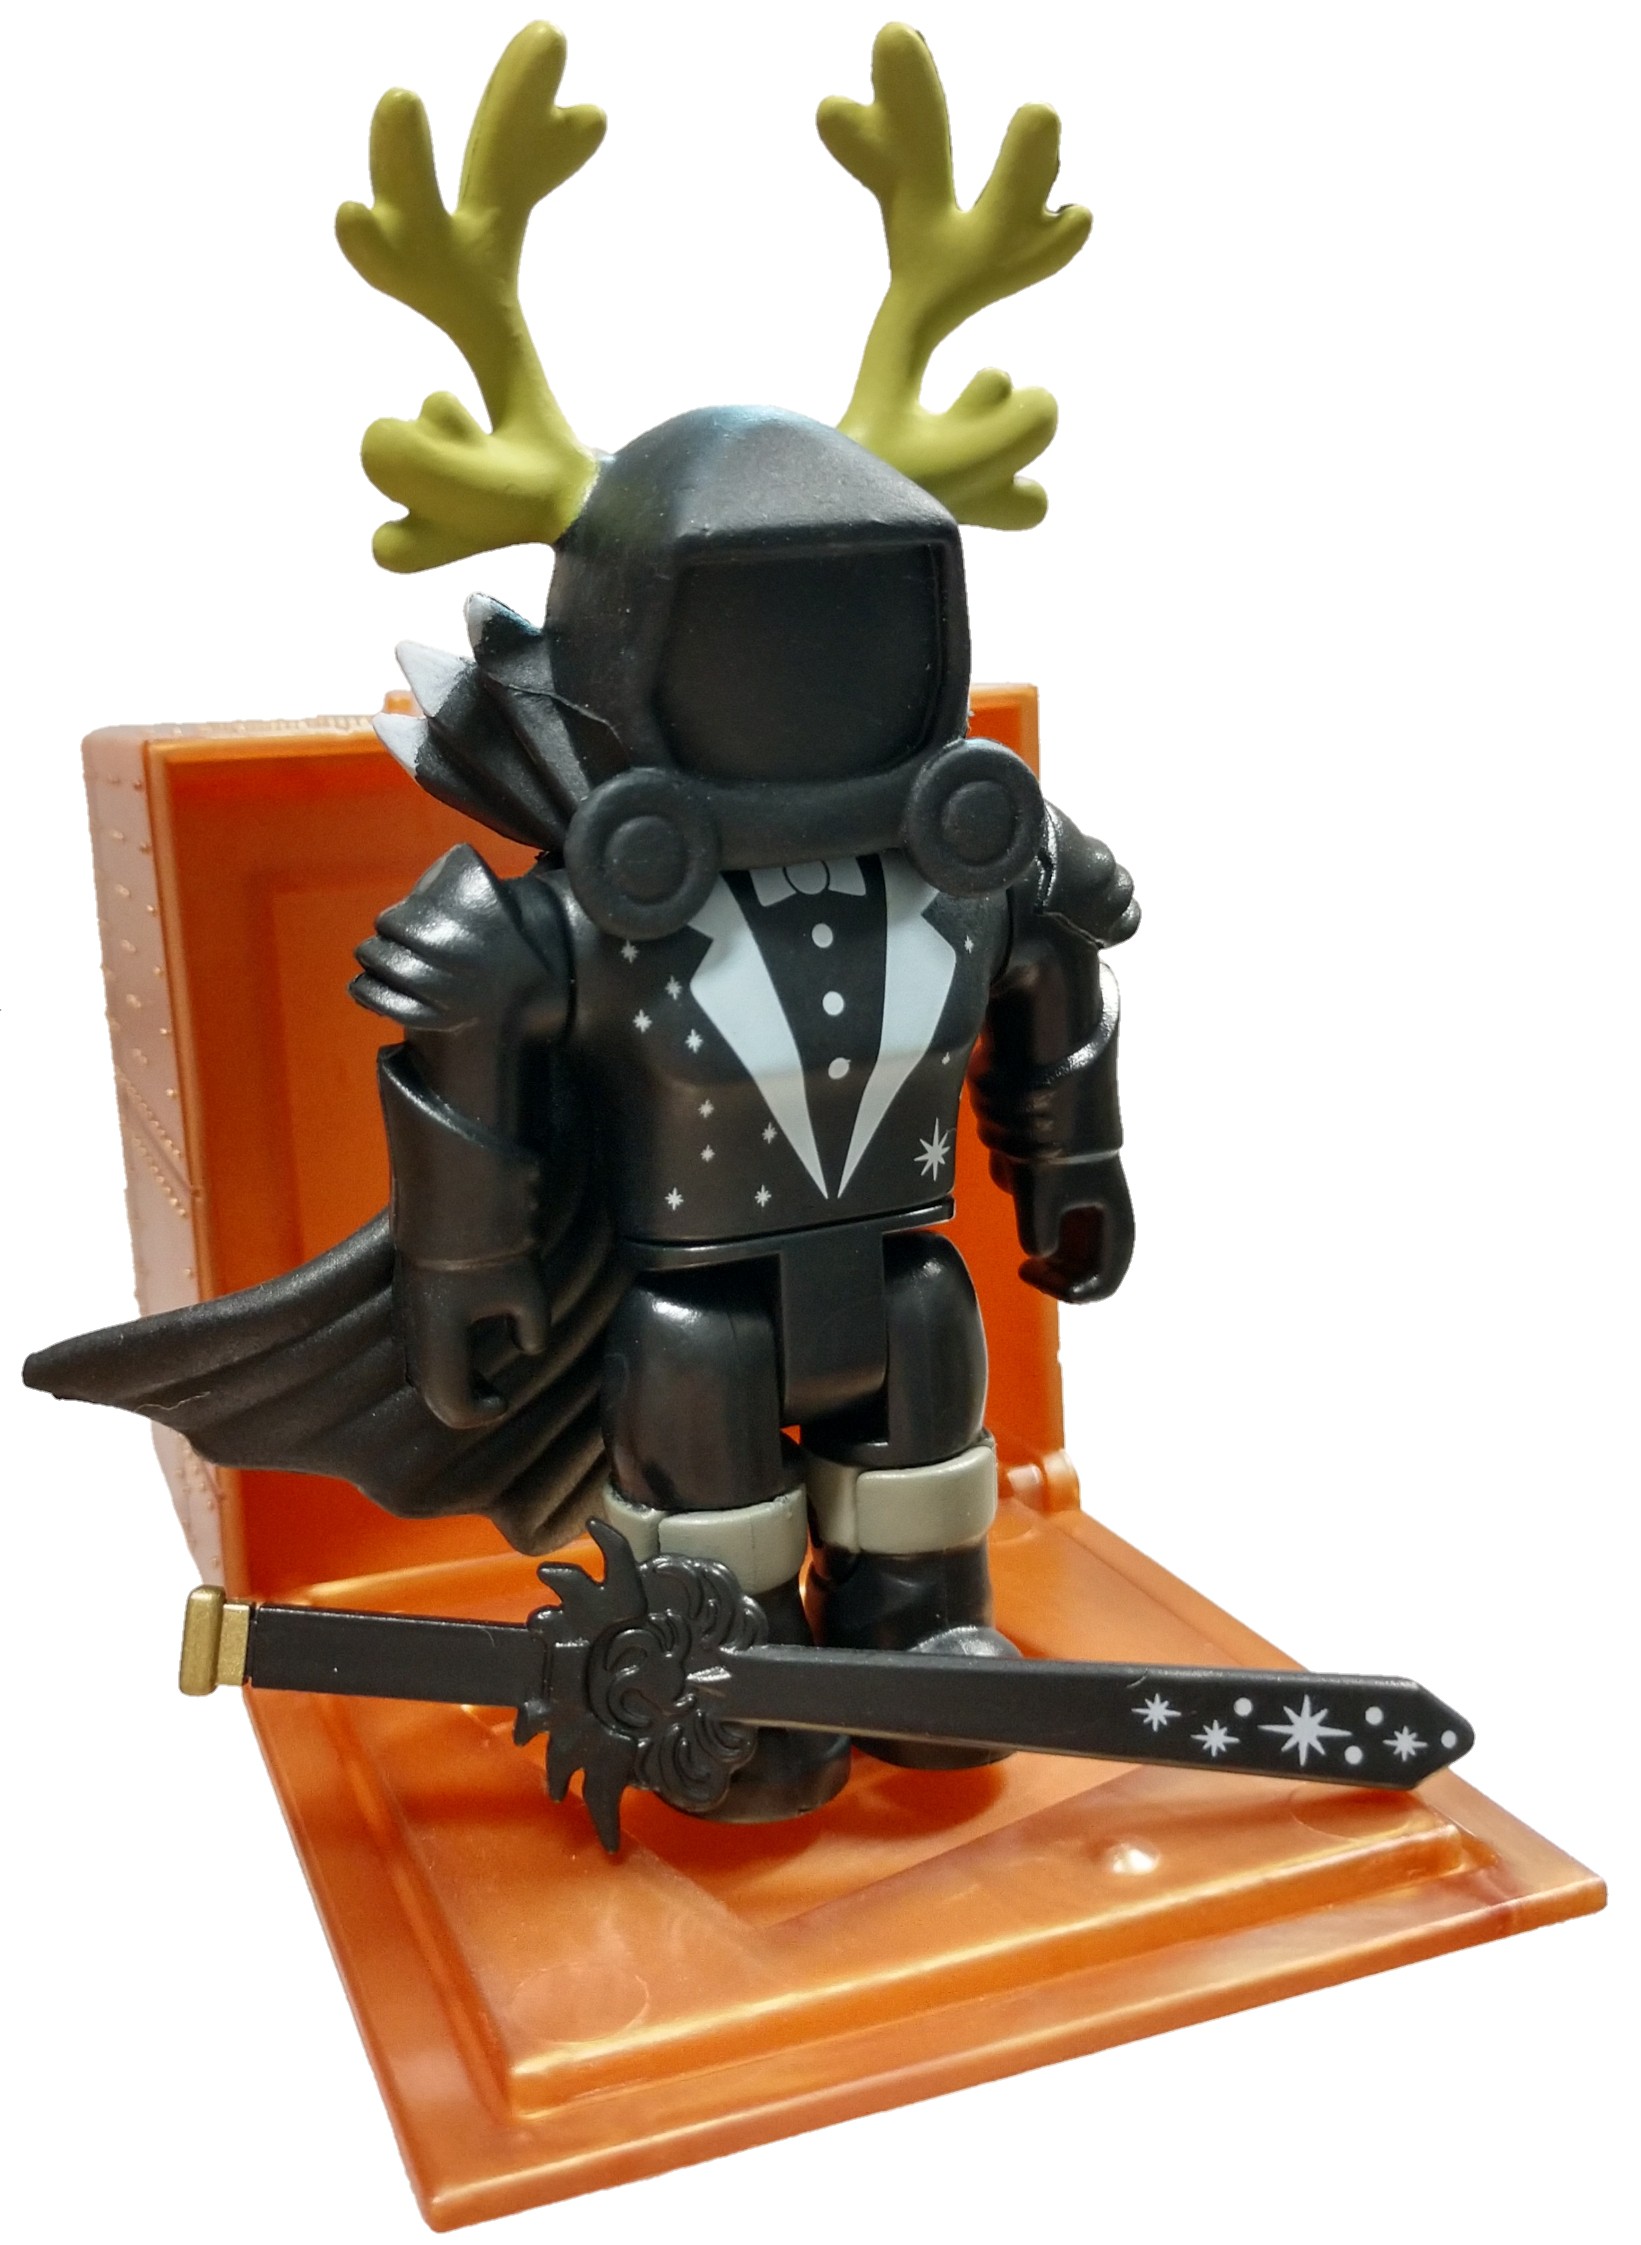 Roblox Series 8 Godzgalaxy 3 Inch Mini Figure With Cube And Online Code Loose Ebay - roblox action figures loose on sale at toywiz com